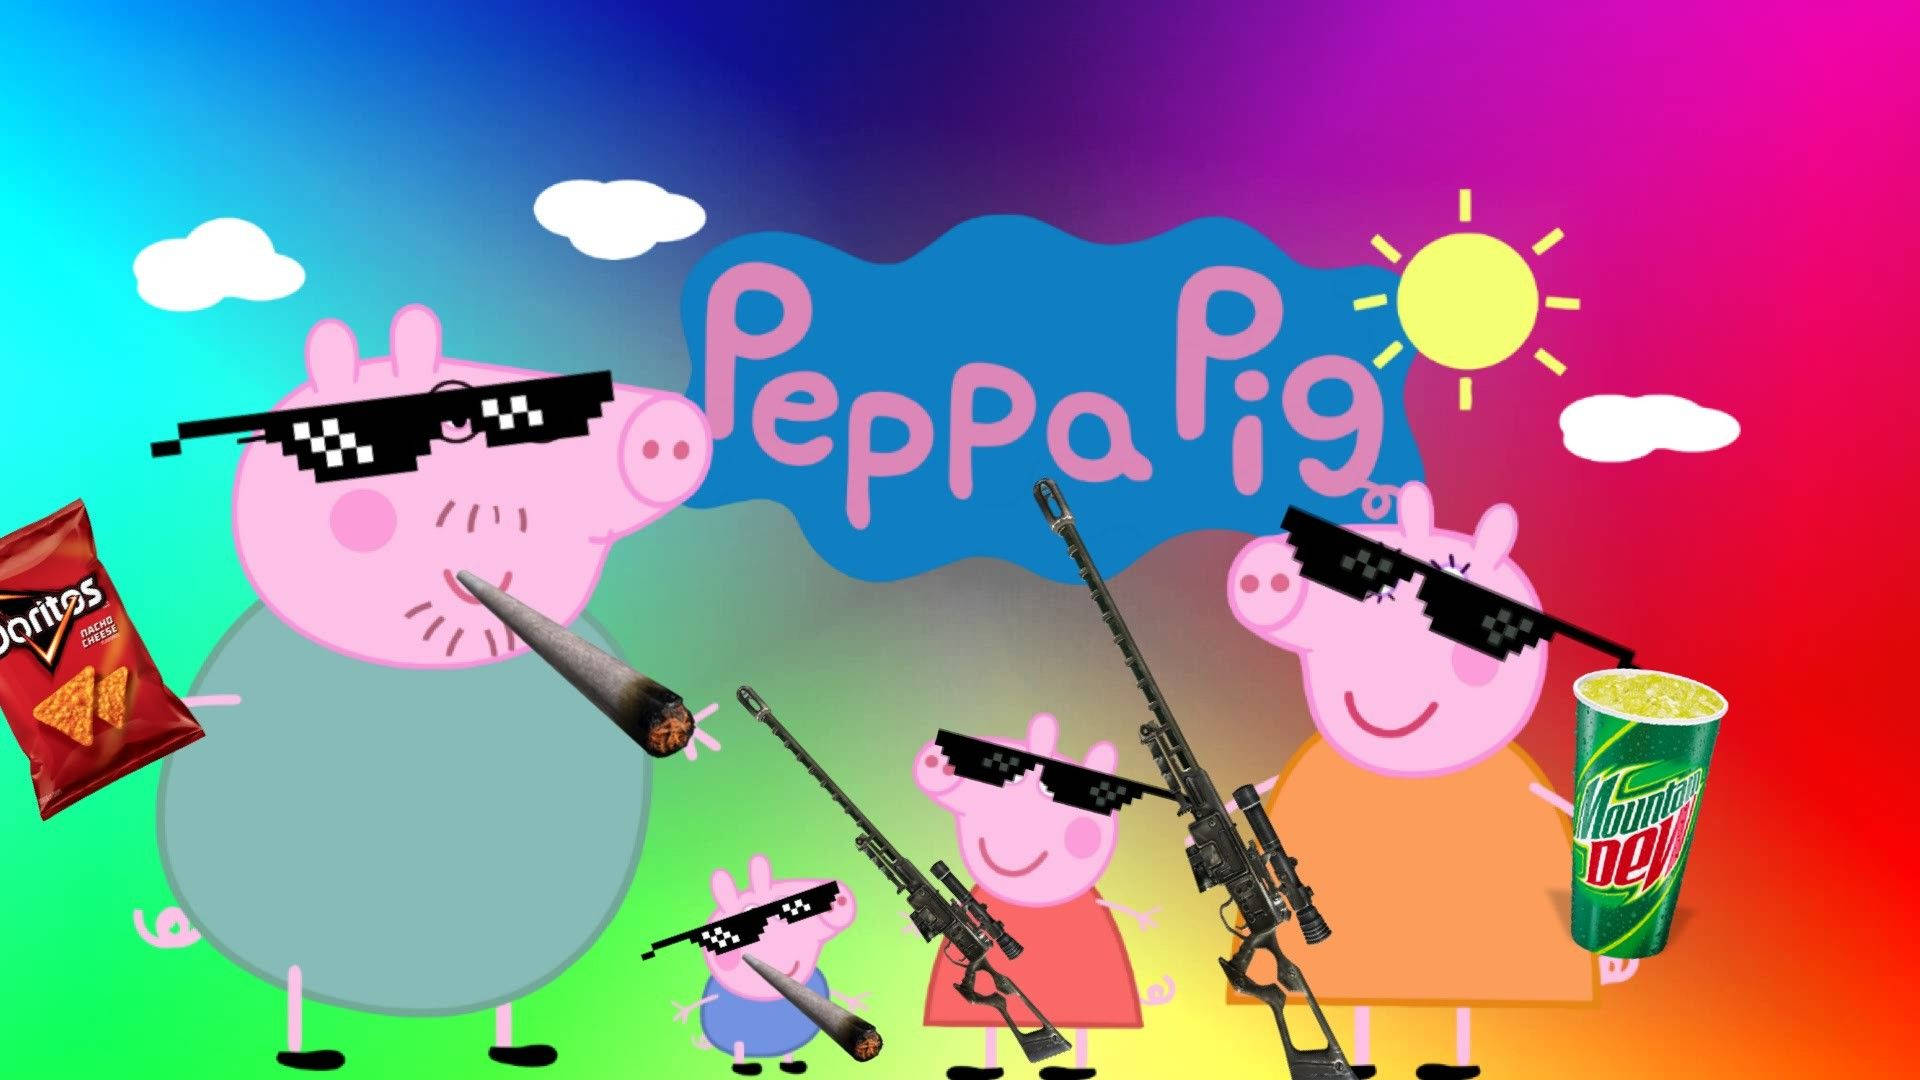 “Peppa Pig, the Coolest Pig Around” Wallpaper